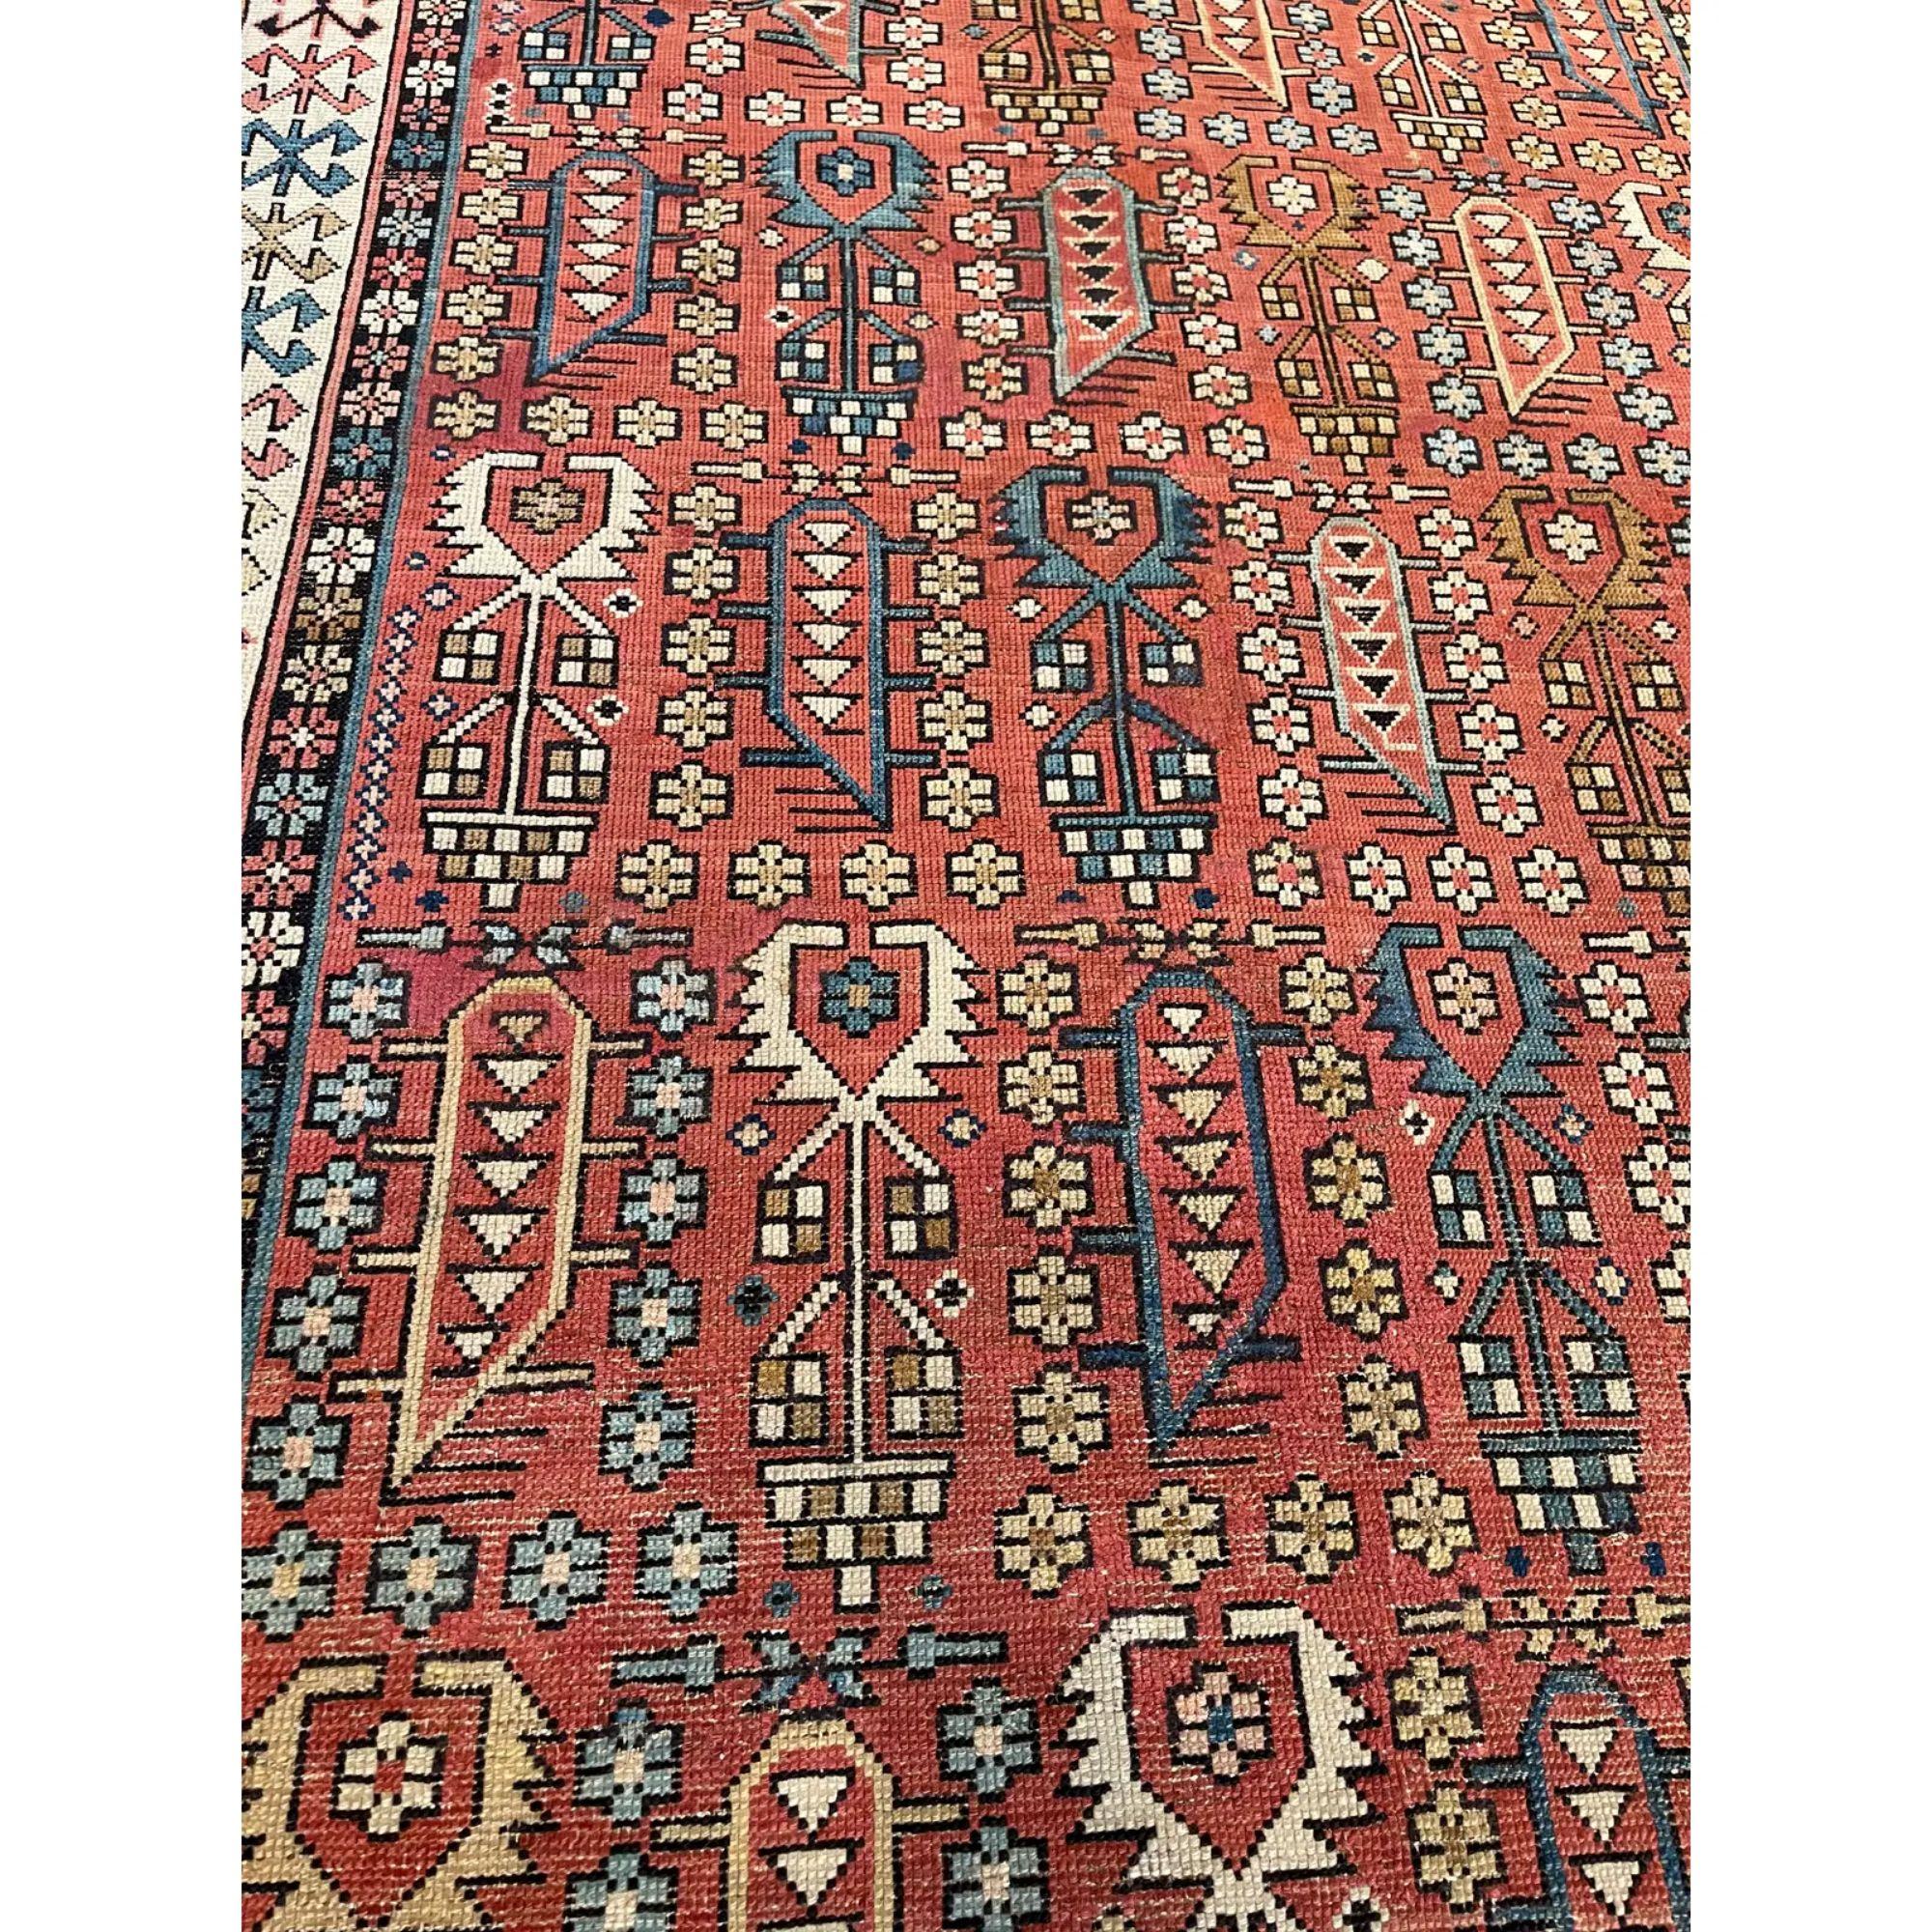 Charming Rare and Collectible Antique Caucasian Baku Khila Rug, Country of Origin: Caucasus, Circa Date: 1800’s – This gorgeous antique rug is an exceptional antique find and a prime example of Caucasian Baku rugs. The rare and magnificent antique